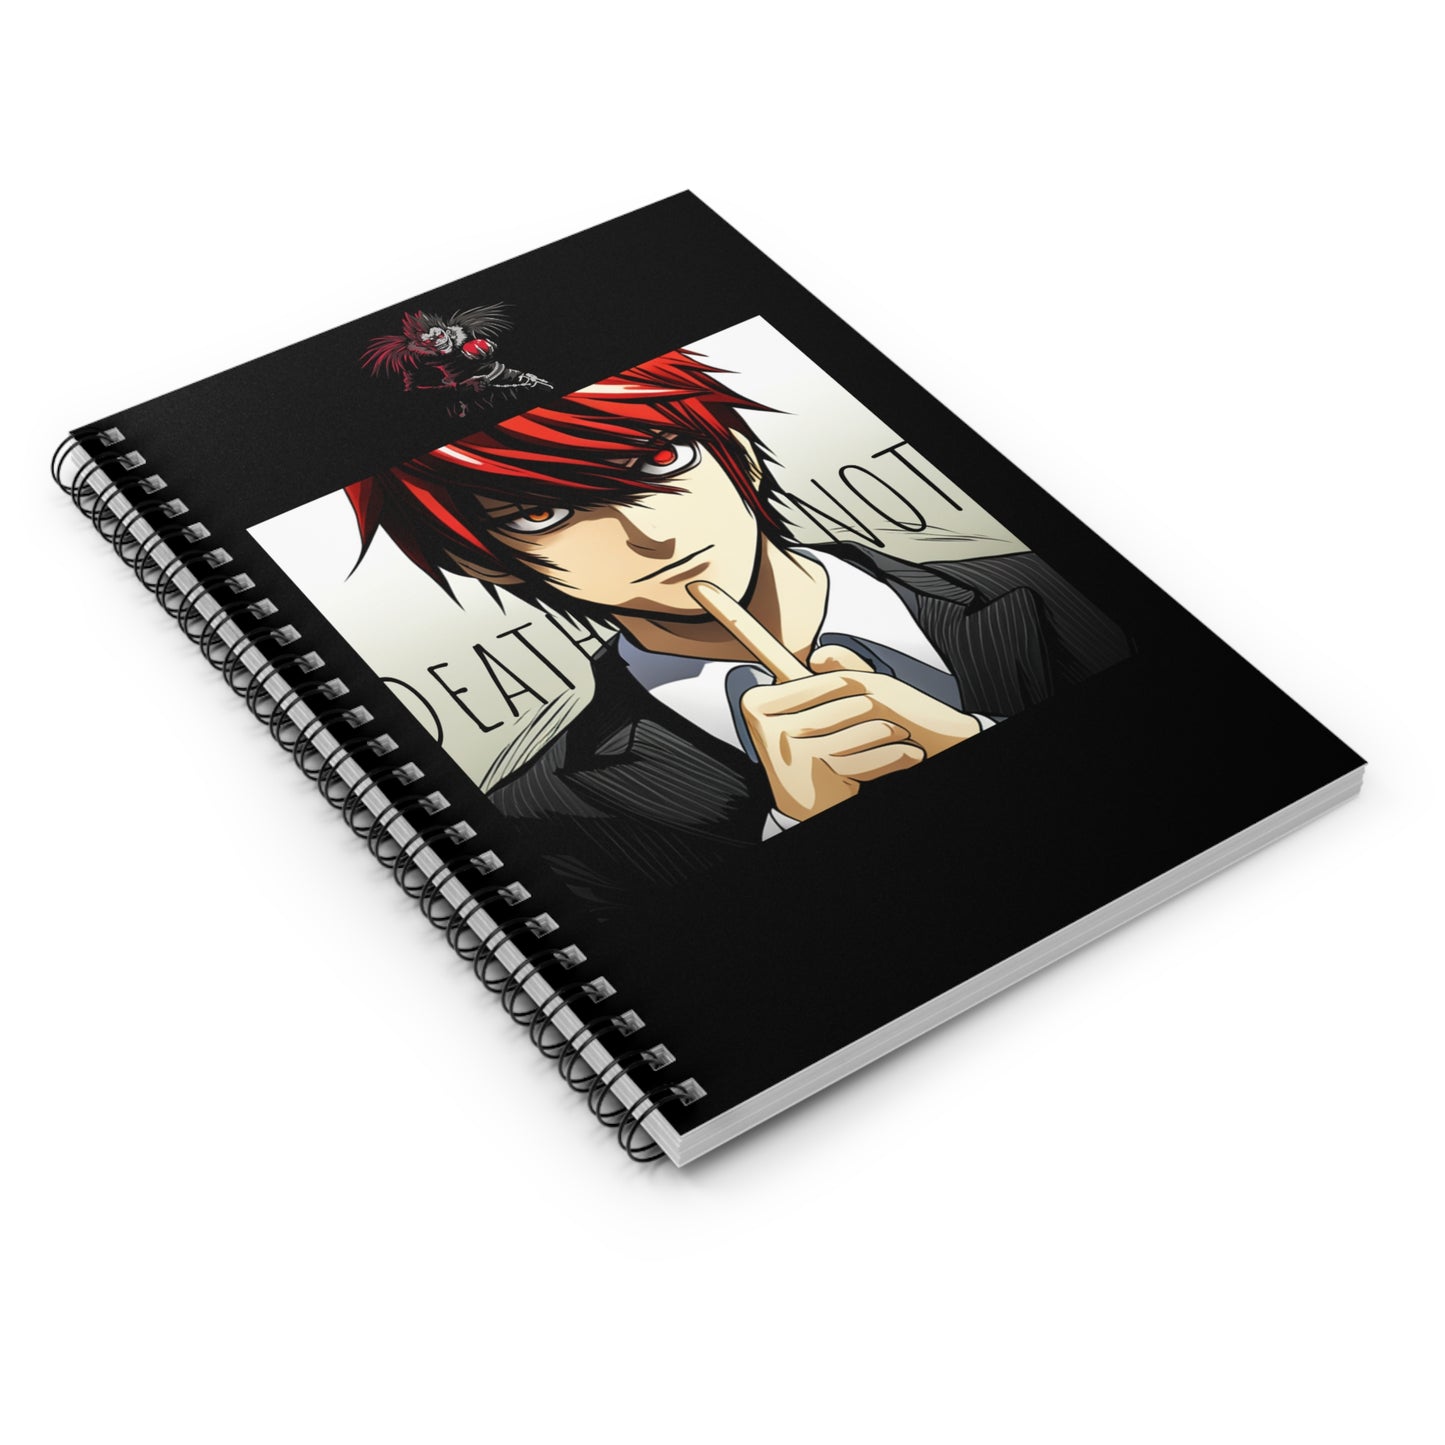 Death Note Spiral Notebook - Ruled Line